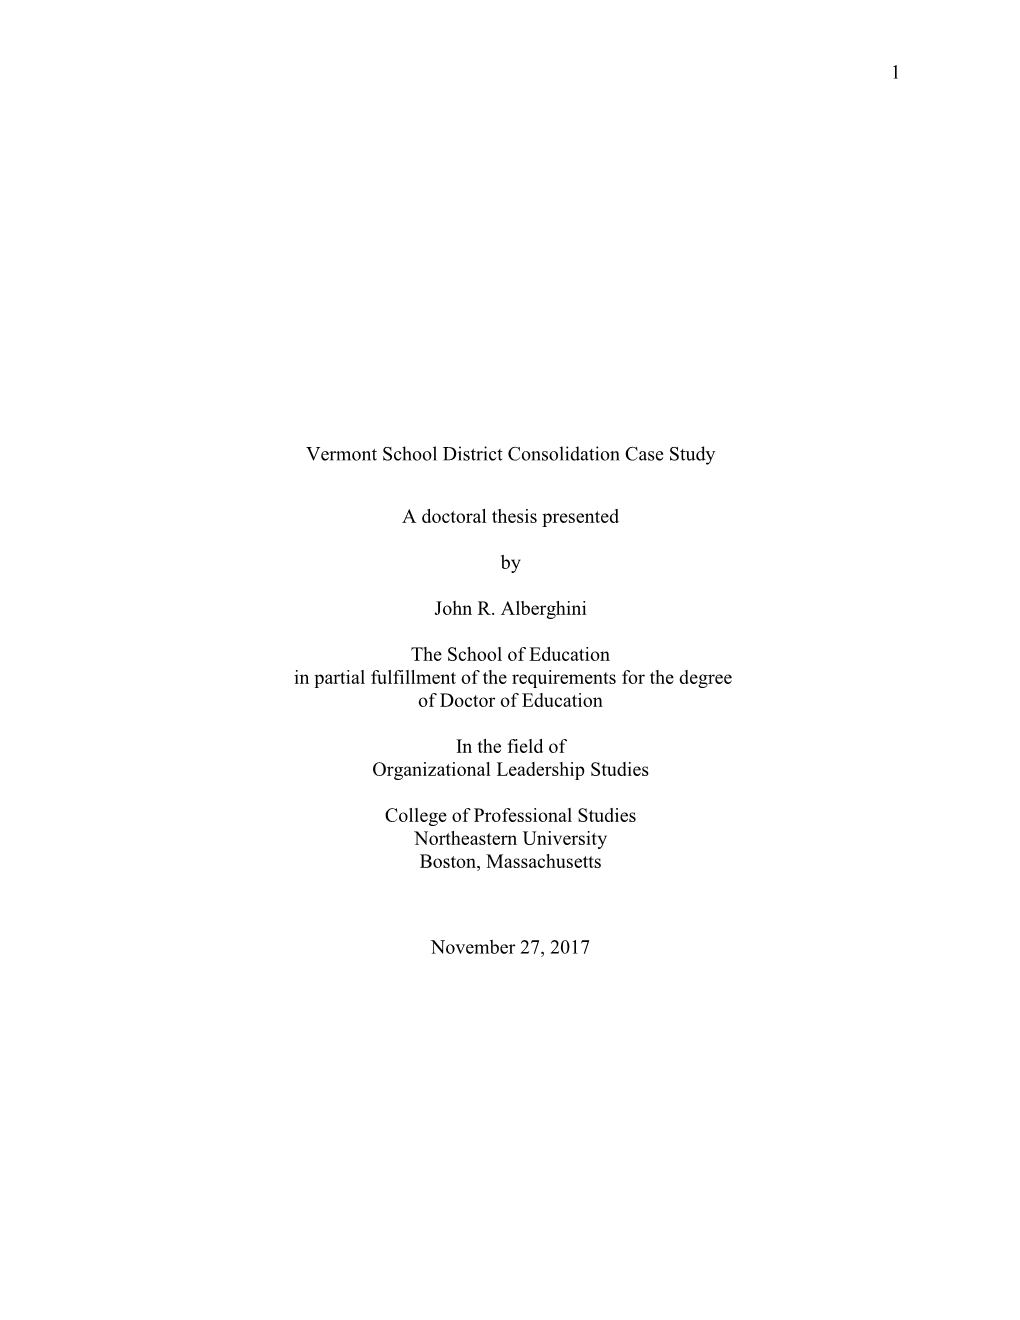 1 Vermont School District Consolidation Case Study a Doctoral Thesis Presented by John R. Alberghini the School of Education In